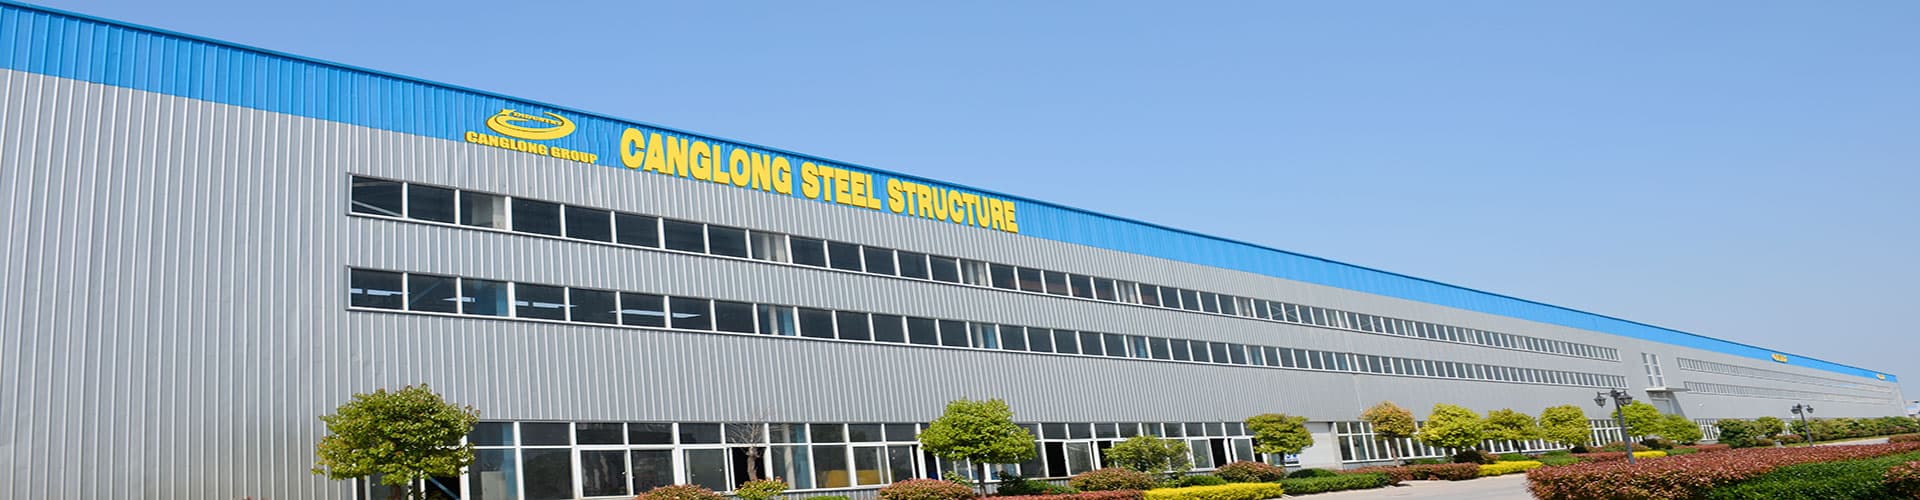 Steel Structure Industry Information